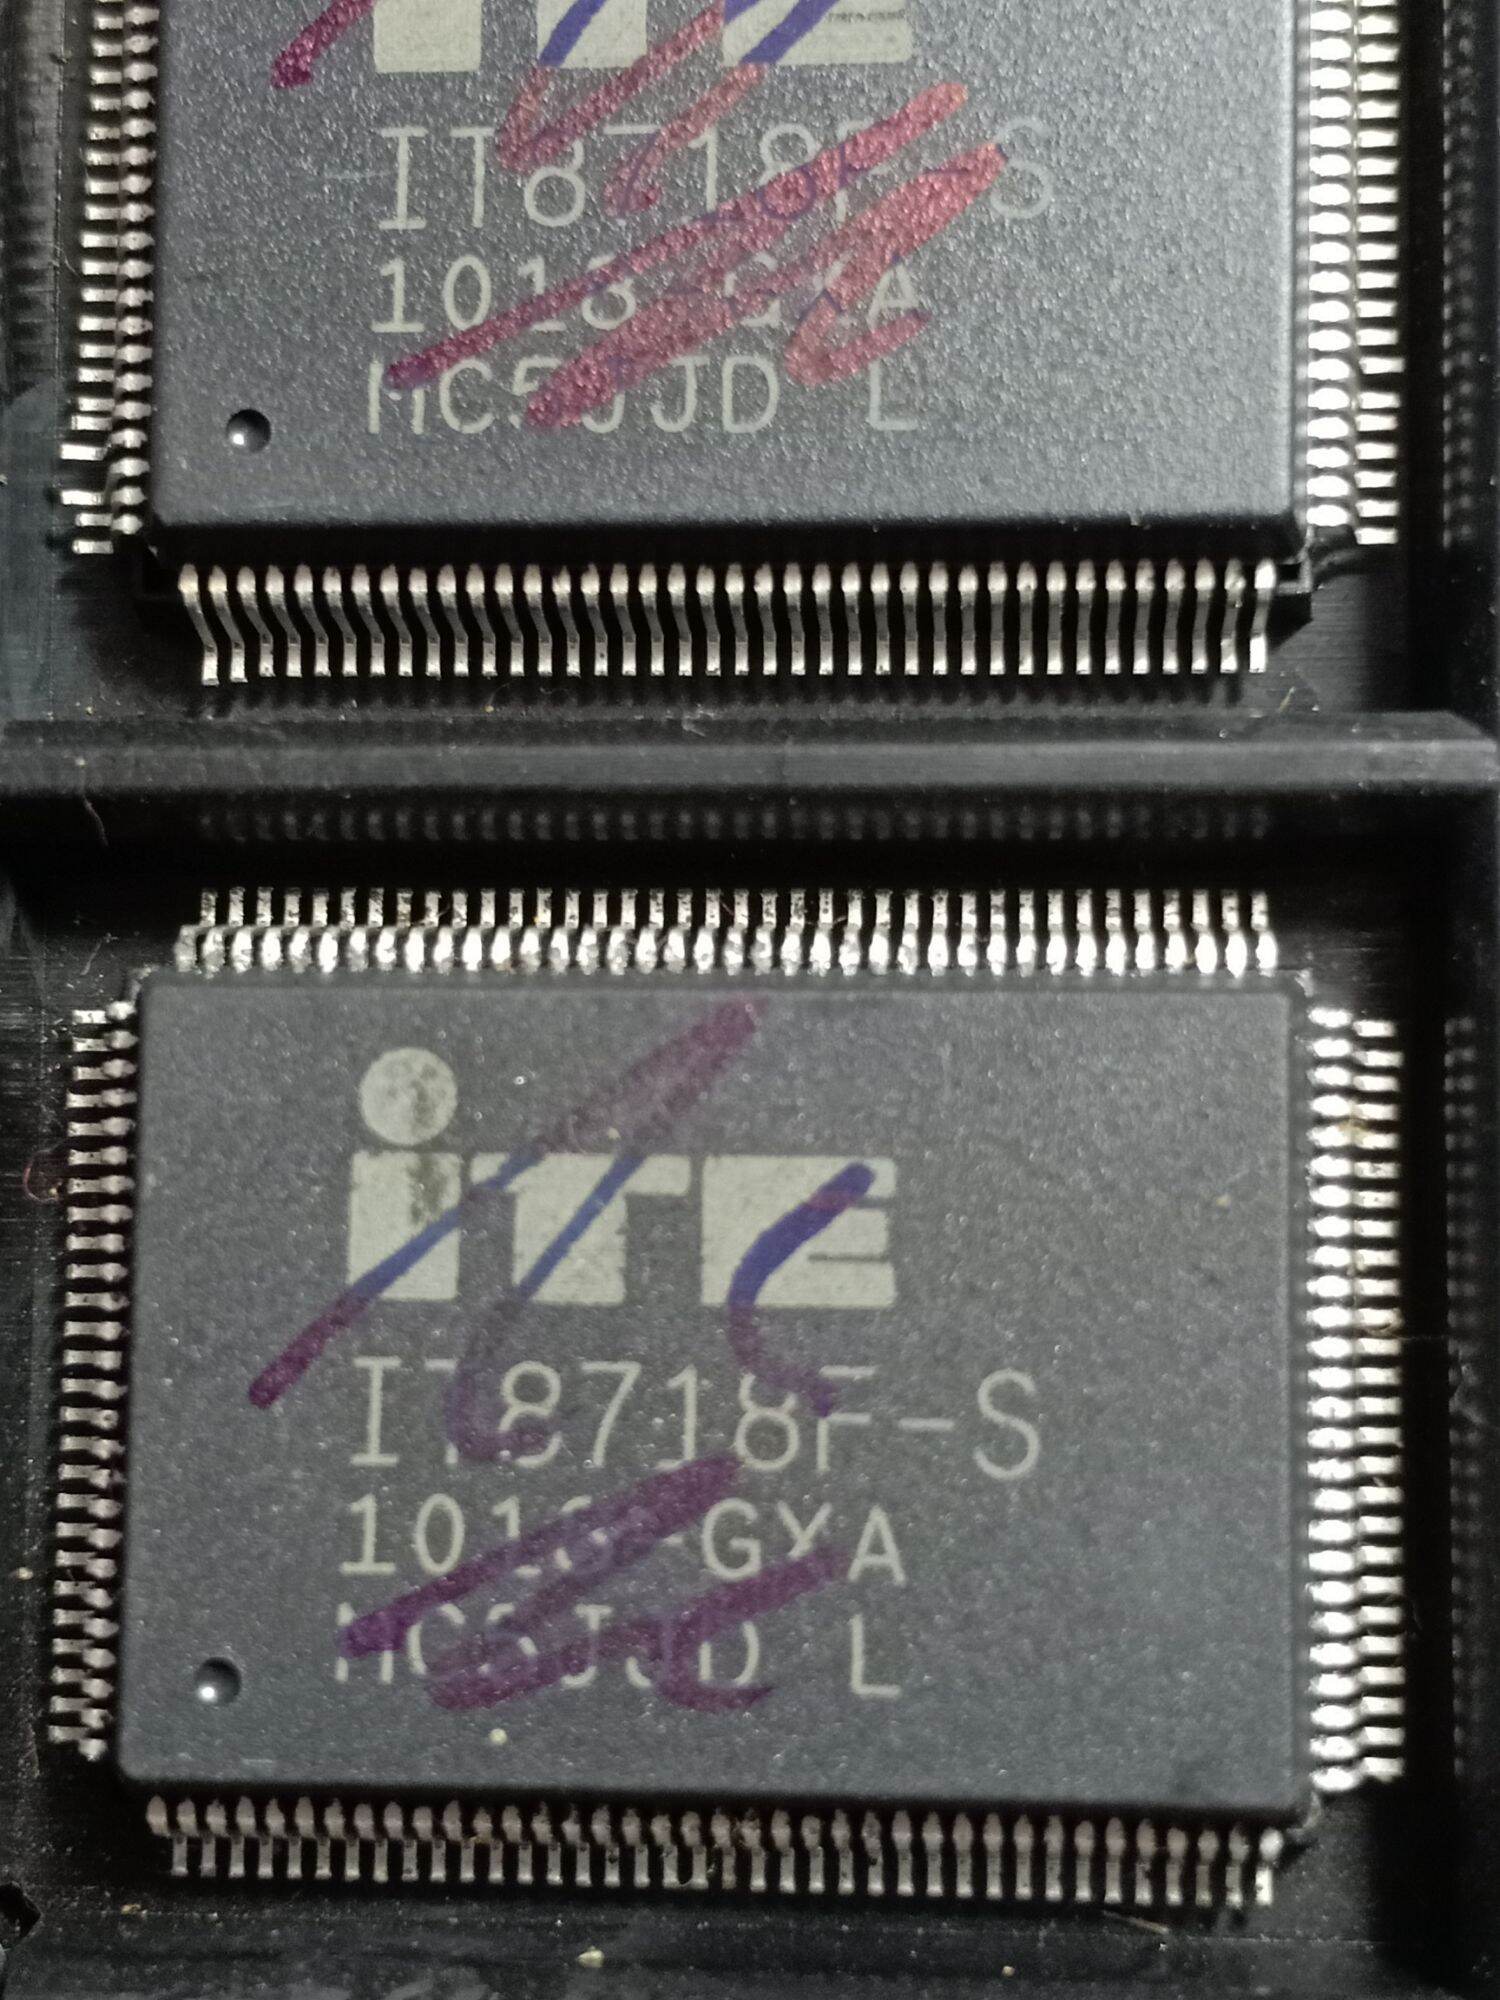 Chipset I 0 Ite IT8718F-S